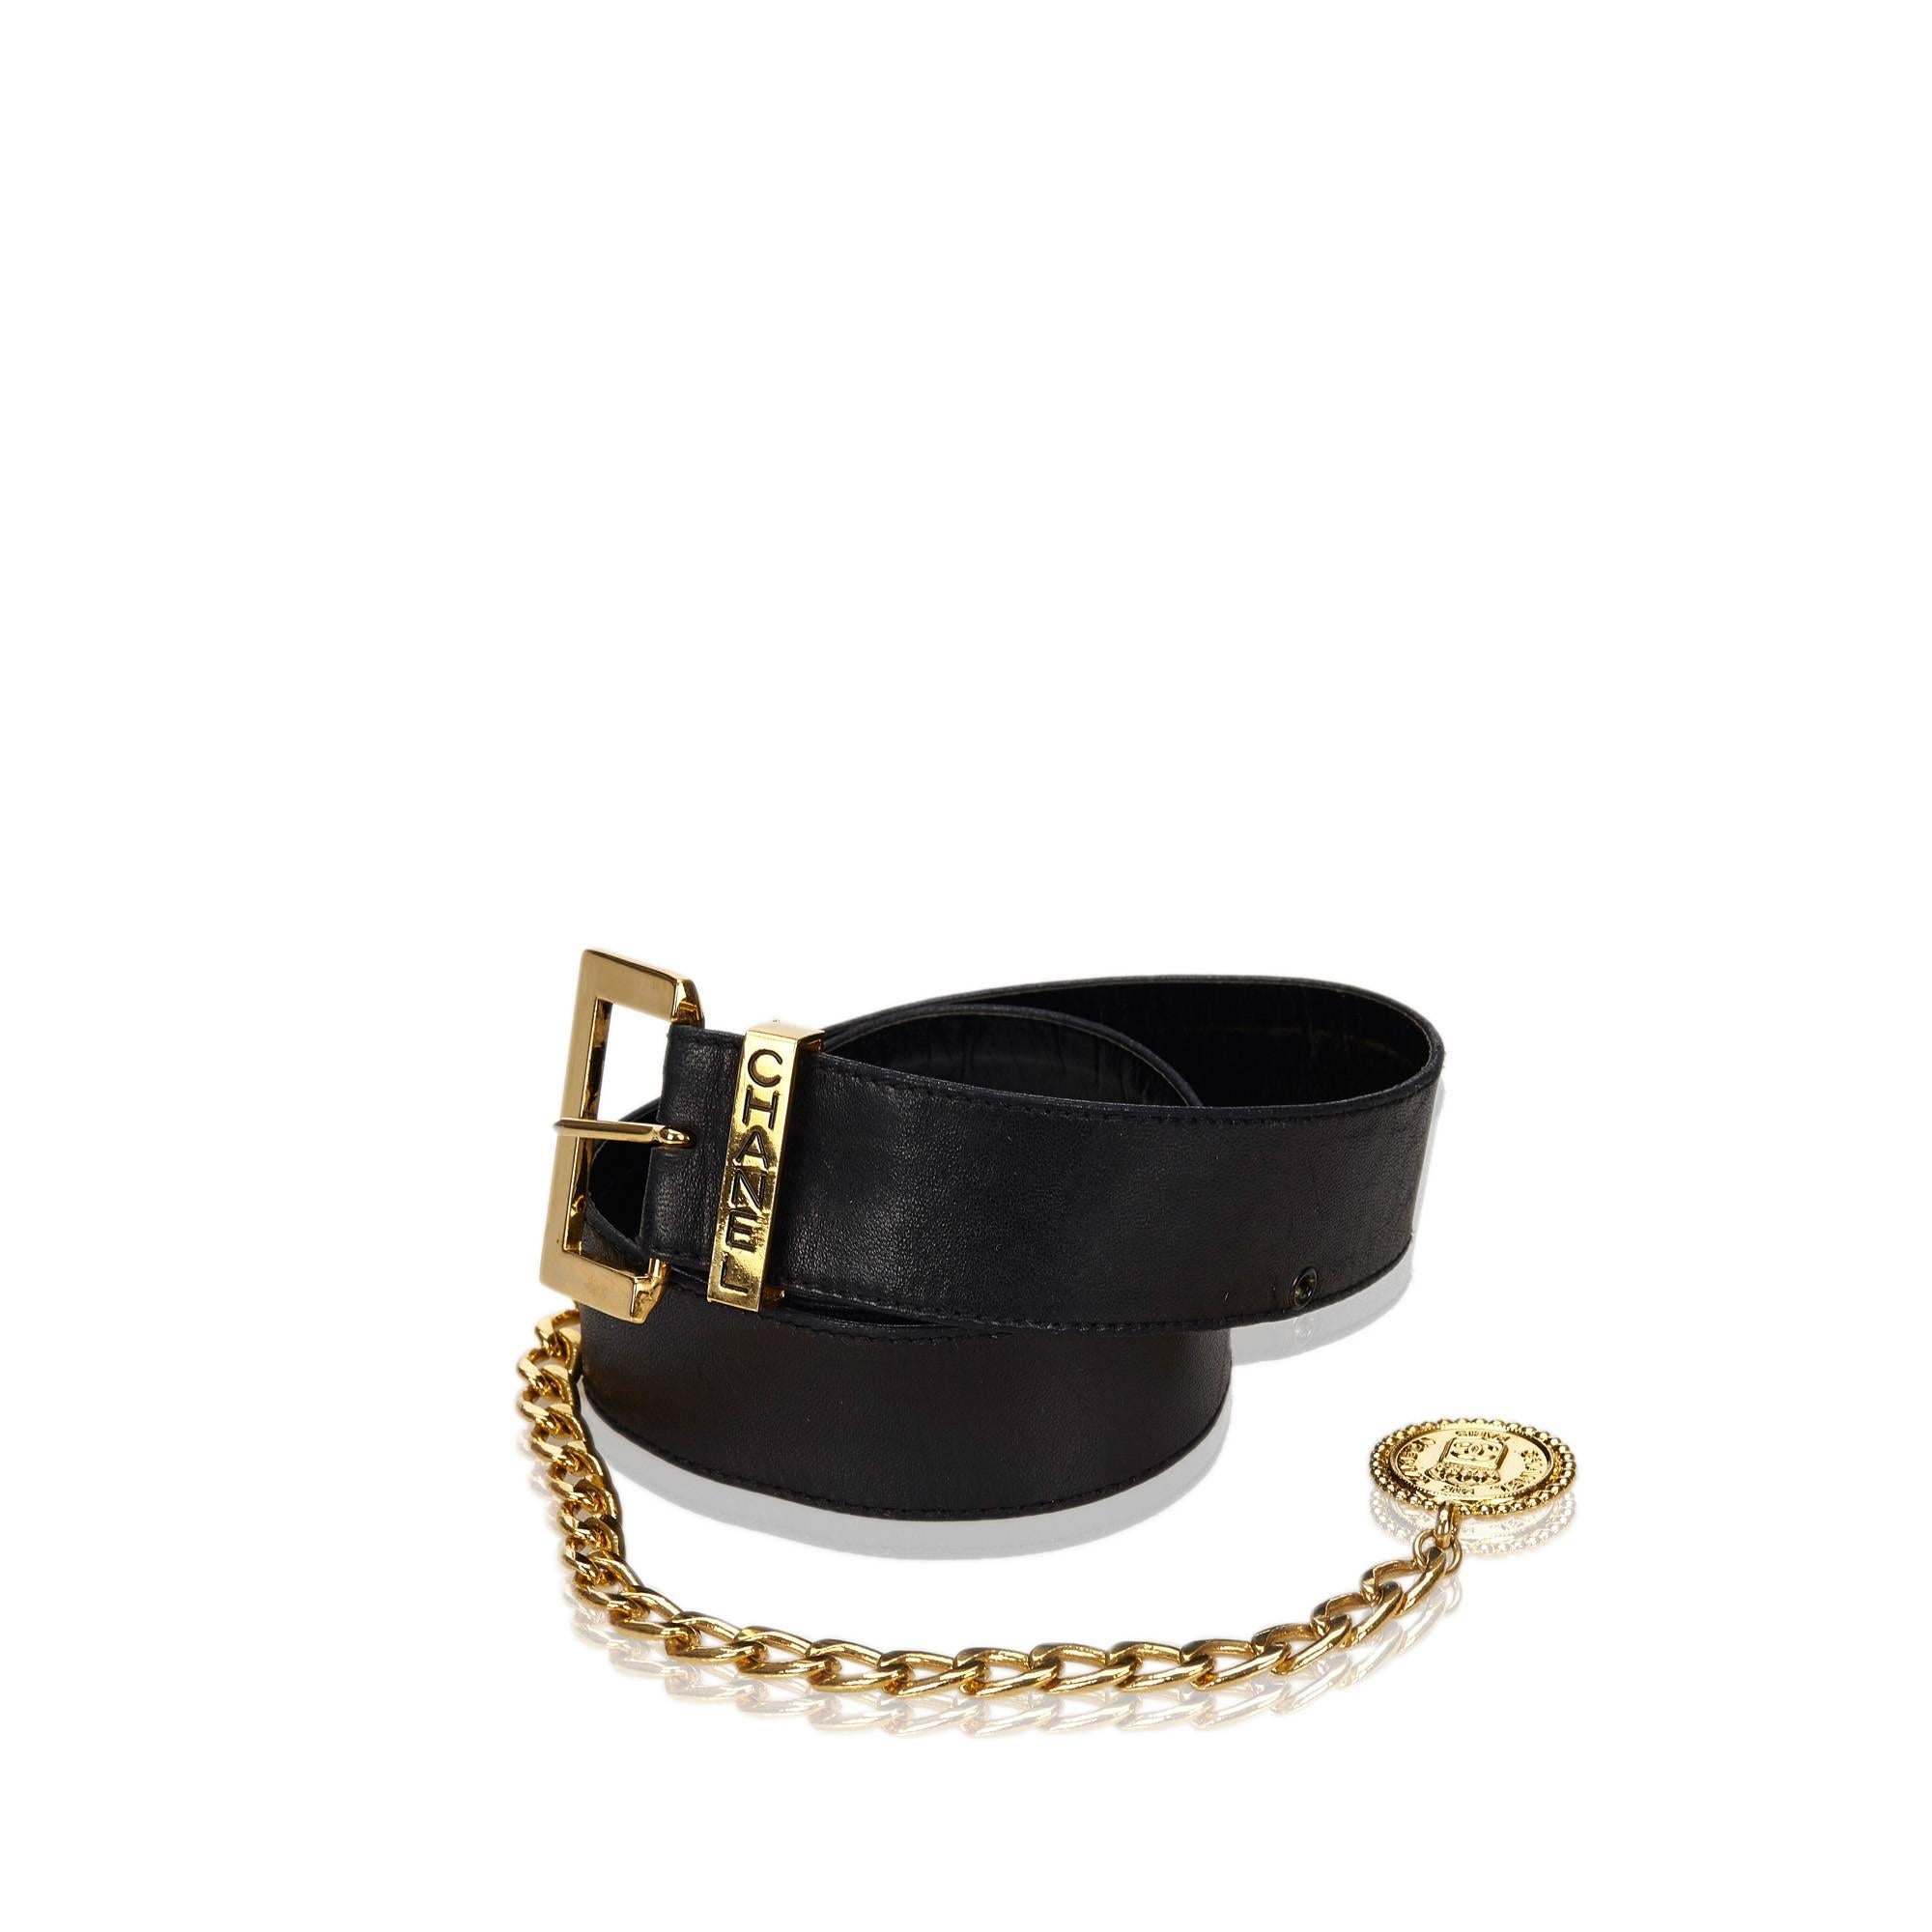 Women's or Men's Chanel Black Leather Waist Strap Gold-Toned Buckle and Chain Belt with Medallion